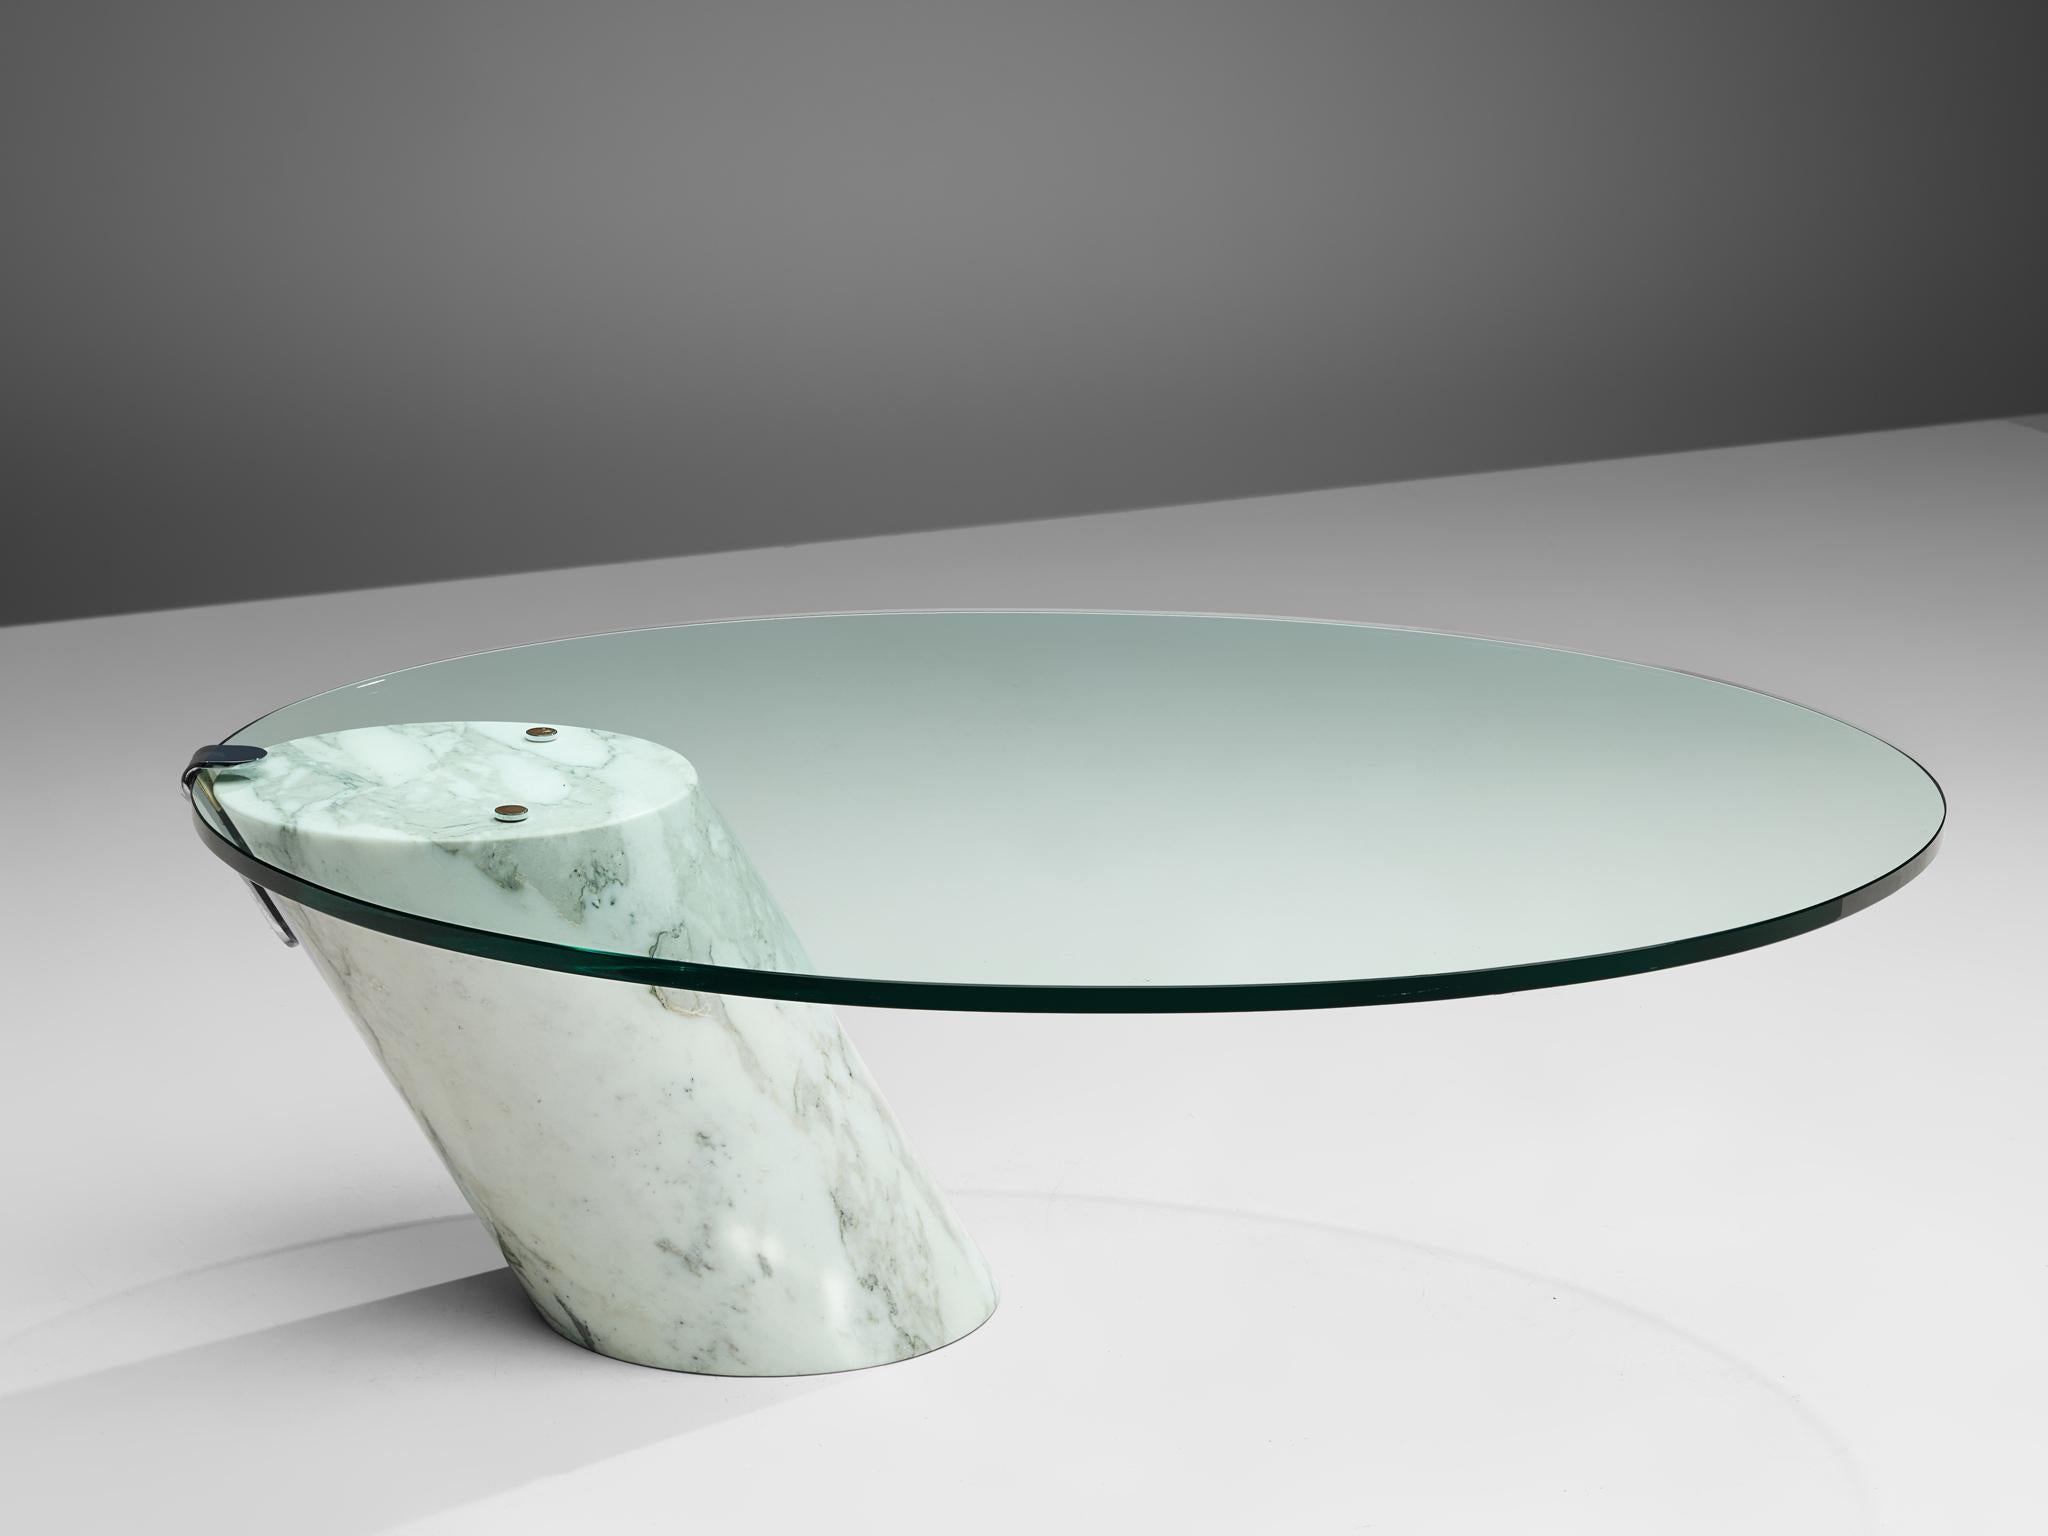 Team Form AG for Ronald Schmitt, coffee table model 'K1000', marble and glass, Switzerland, circa 1974. 

This beautifully constructed cocktail table designed by Team Form AG for Ronald Schmitt. This piece is made of a solid Carrara marble base and